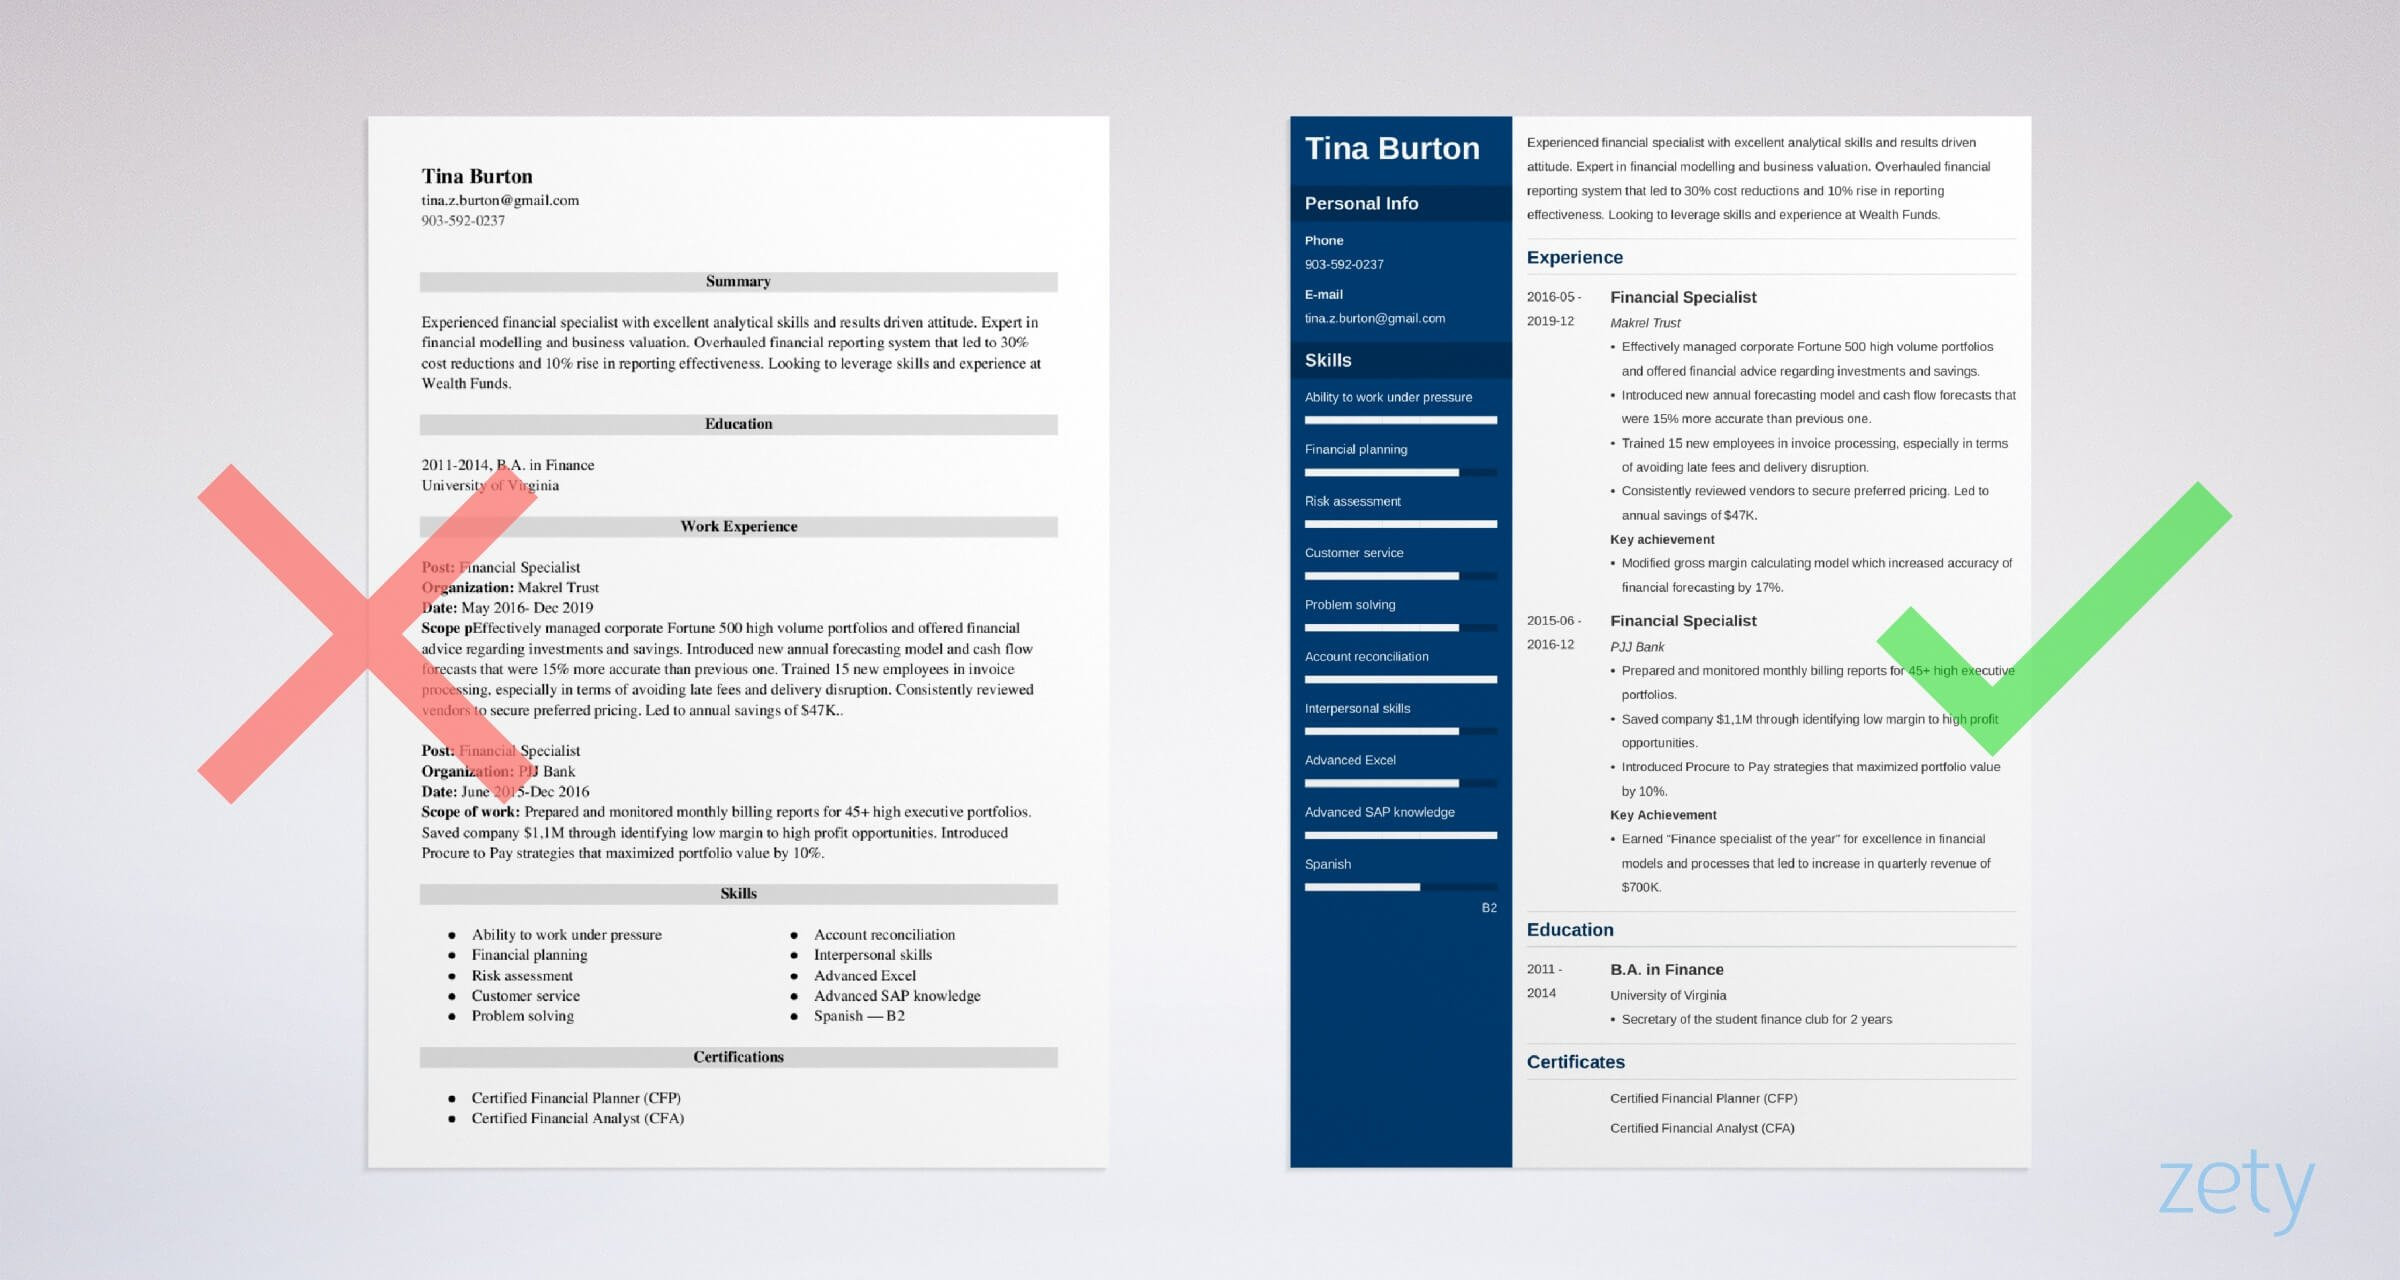 Resume Samples for Experienced Finance Professionals Finance Resume Examples & Writing Guide for 2021